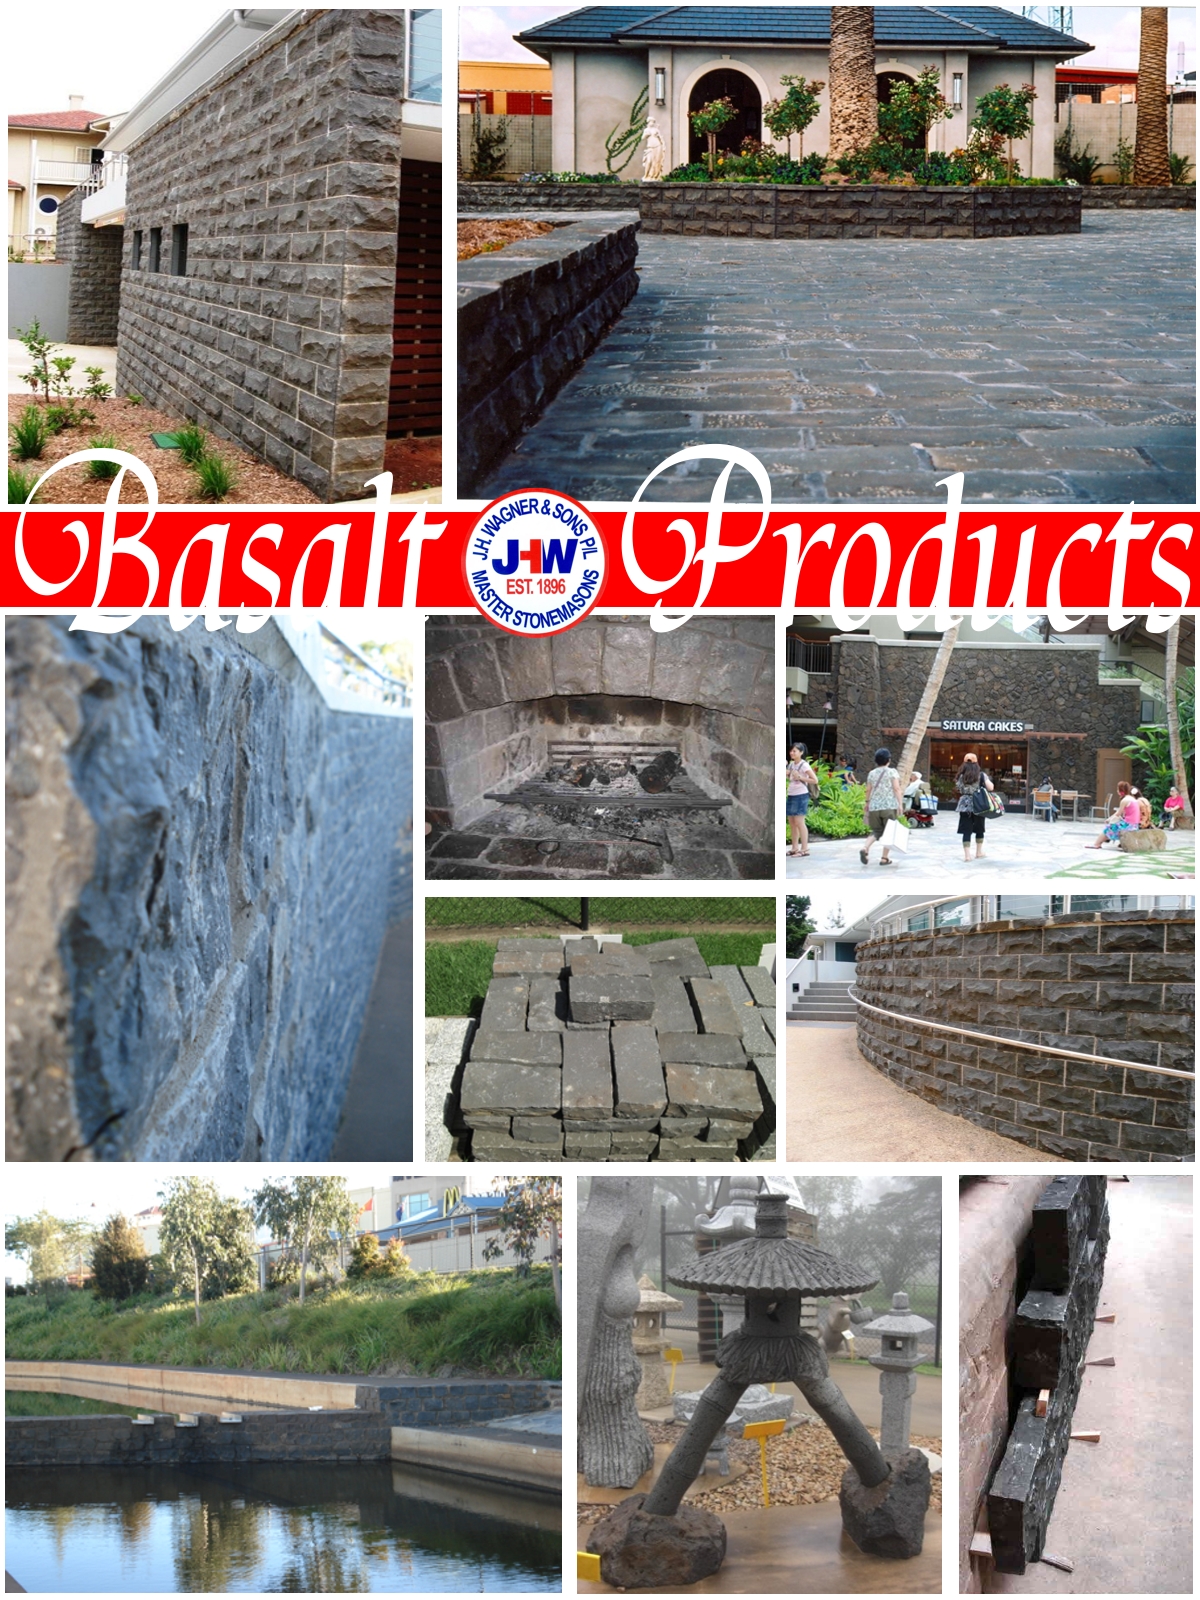 Basalt Products by J.H. Wagner & Sons